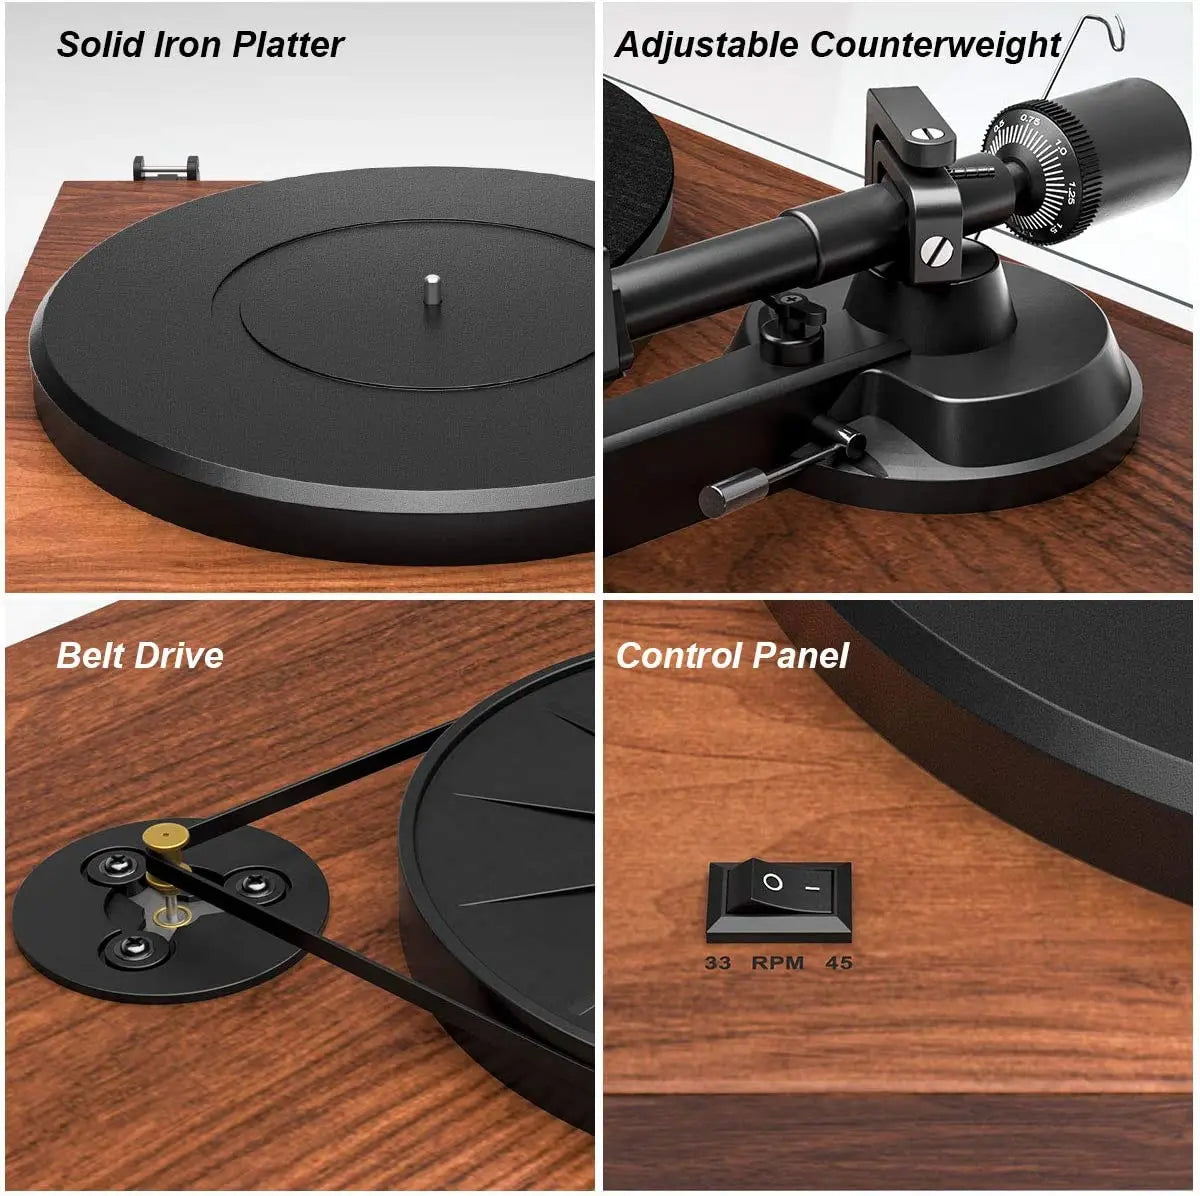 ANGELS HORN Turntable, Vinyl Record Player, Built-in Phono Preamp, Belt Drive 2-Speed, Adjustable Counterweight, AT-3600L (Upgraded Bluetooth Version)